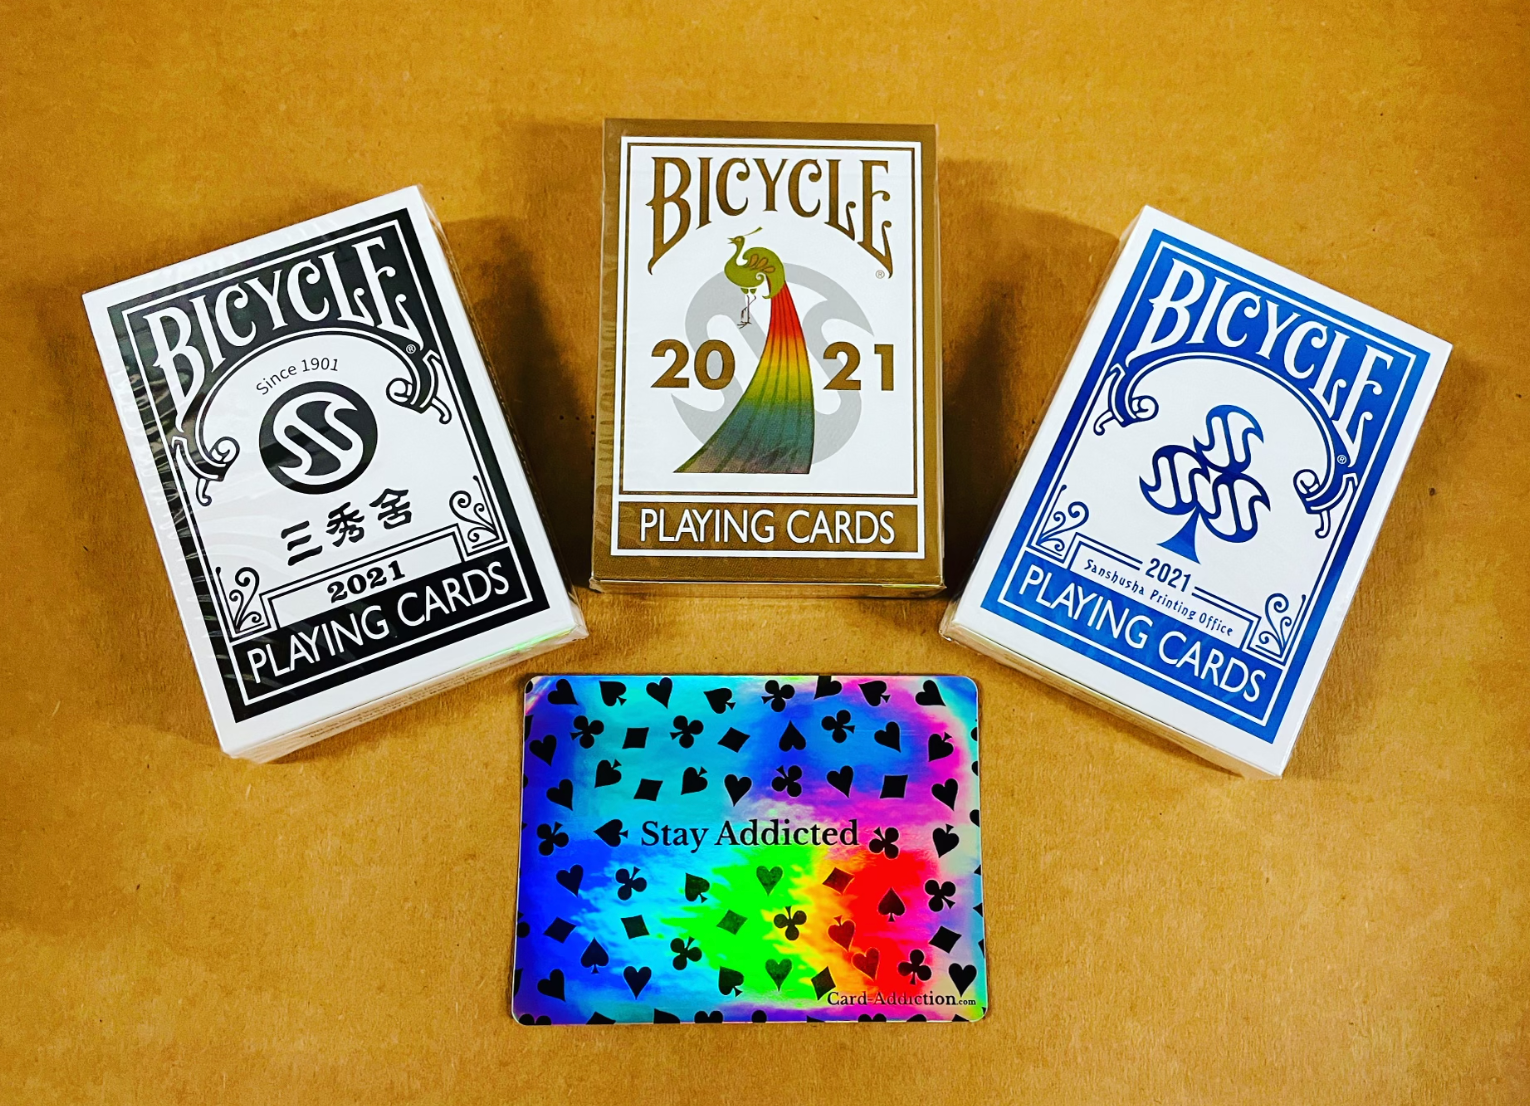 BICYCLE Sanshusha Special Rainbow Gold Edition 3 Deck Set (Japan Import) Playing Cards [LIMIT 1]